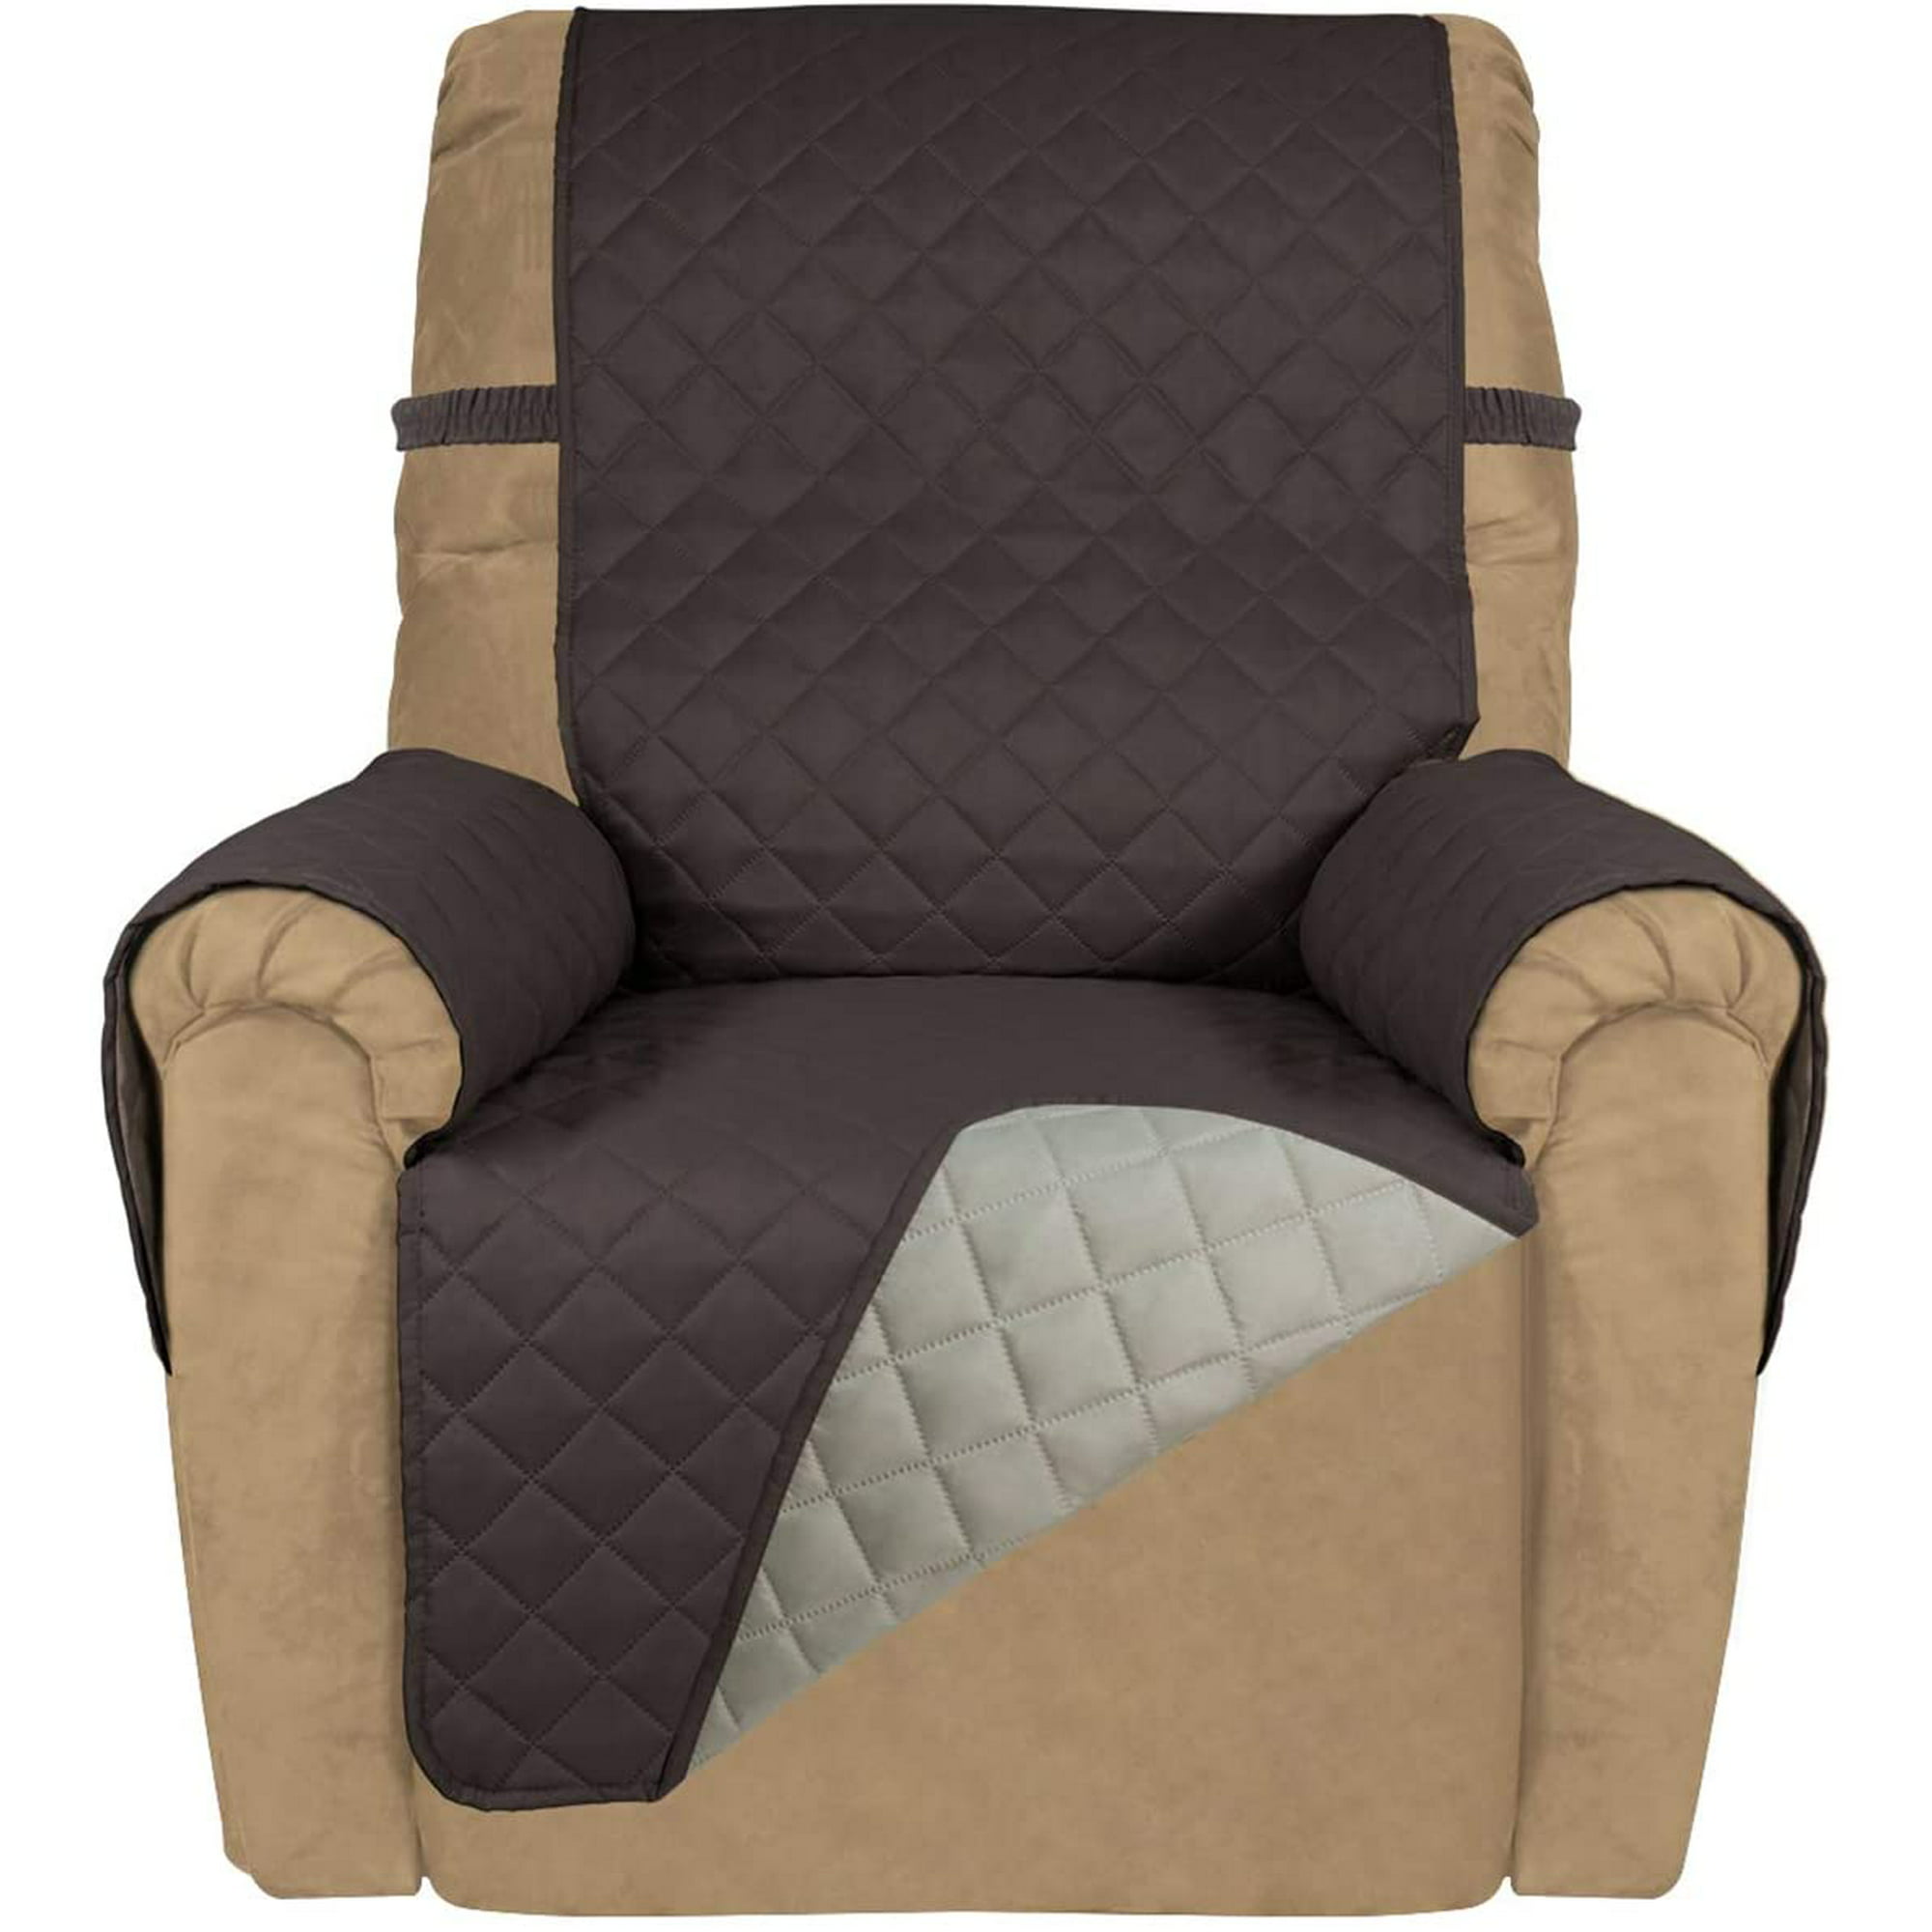 Reversible Quilted Recliner Sofa Cover, Furniture Protectors For Reclining Sofas